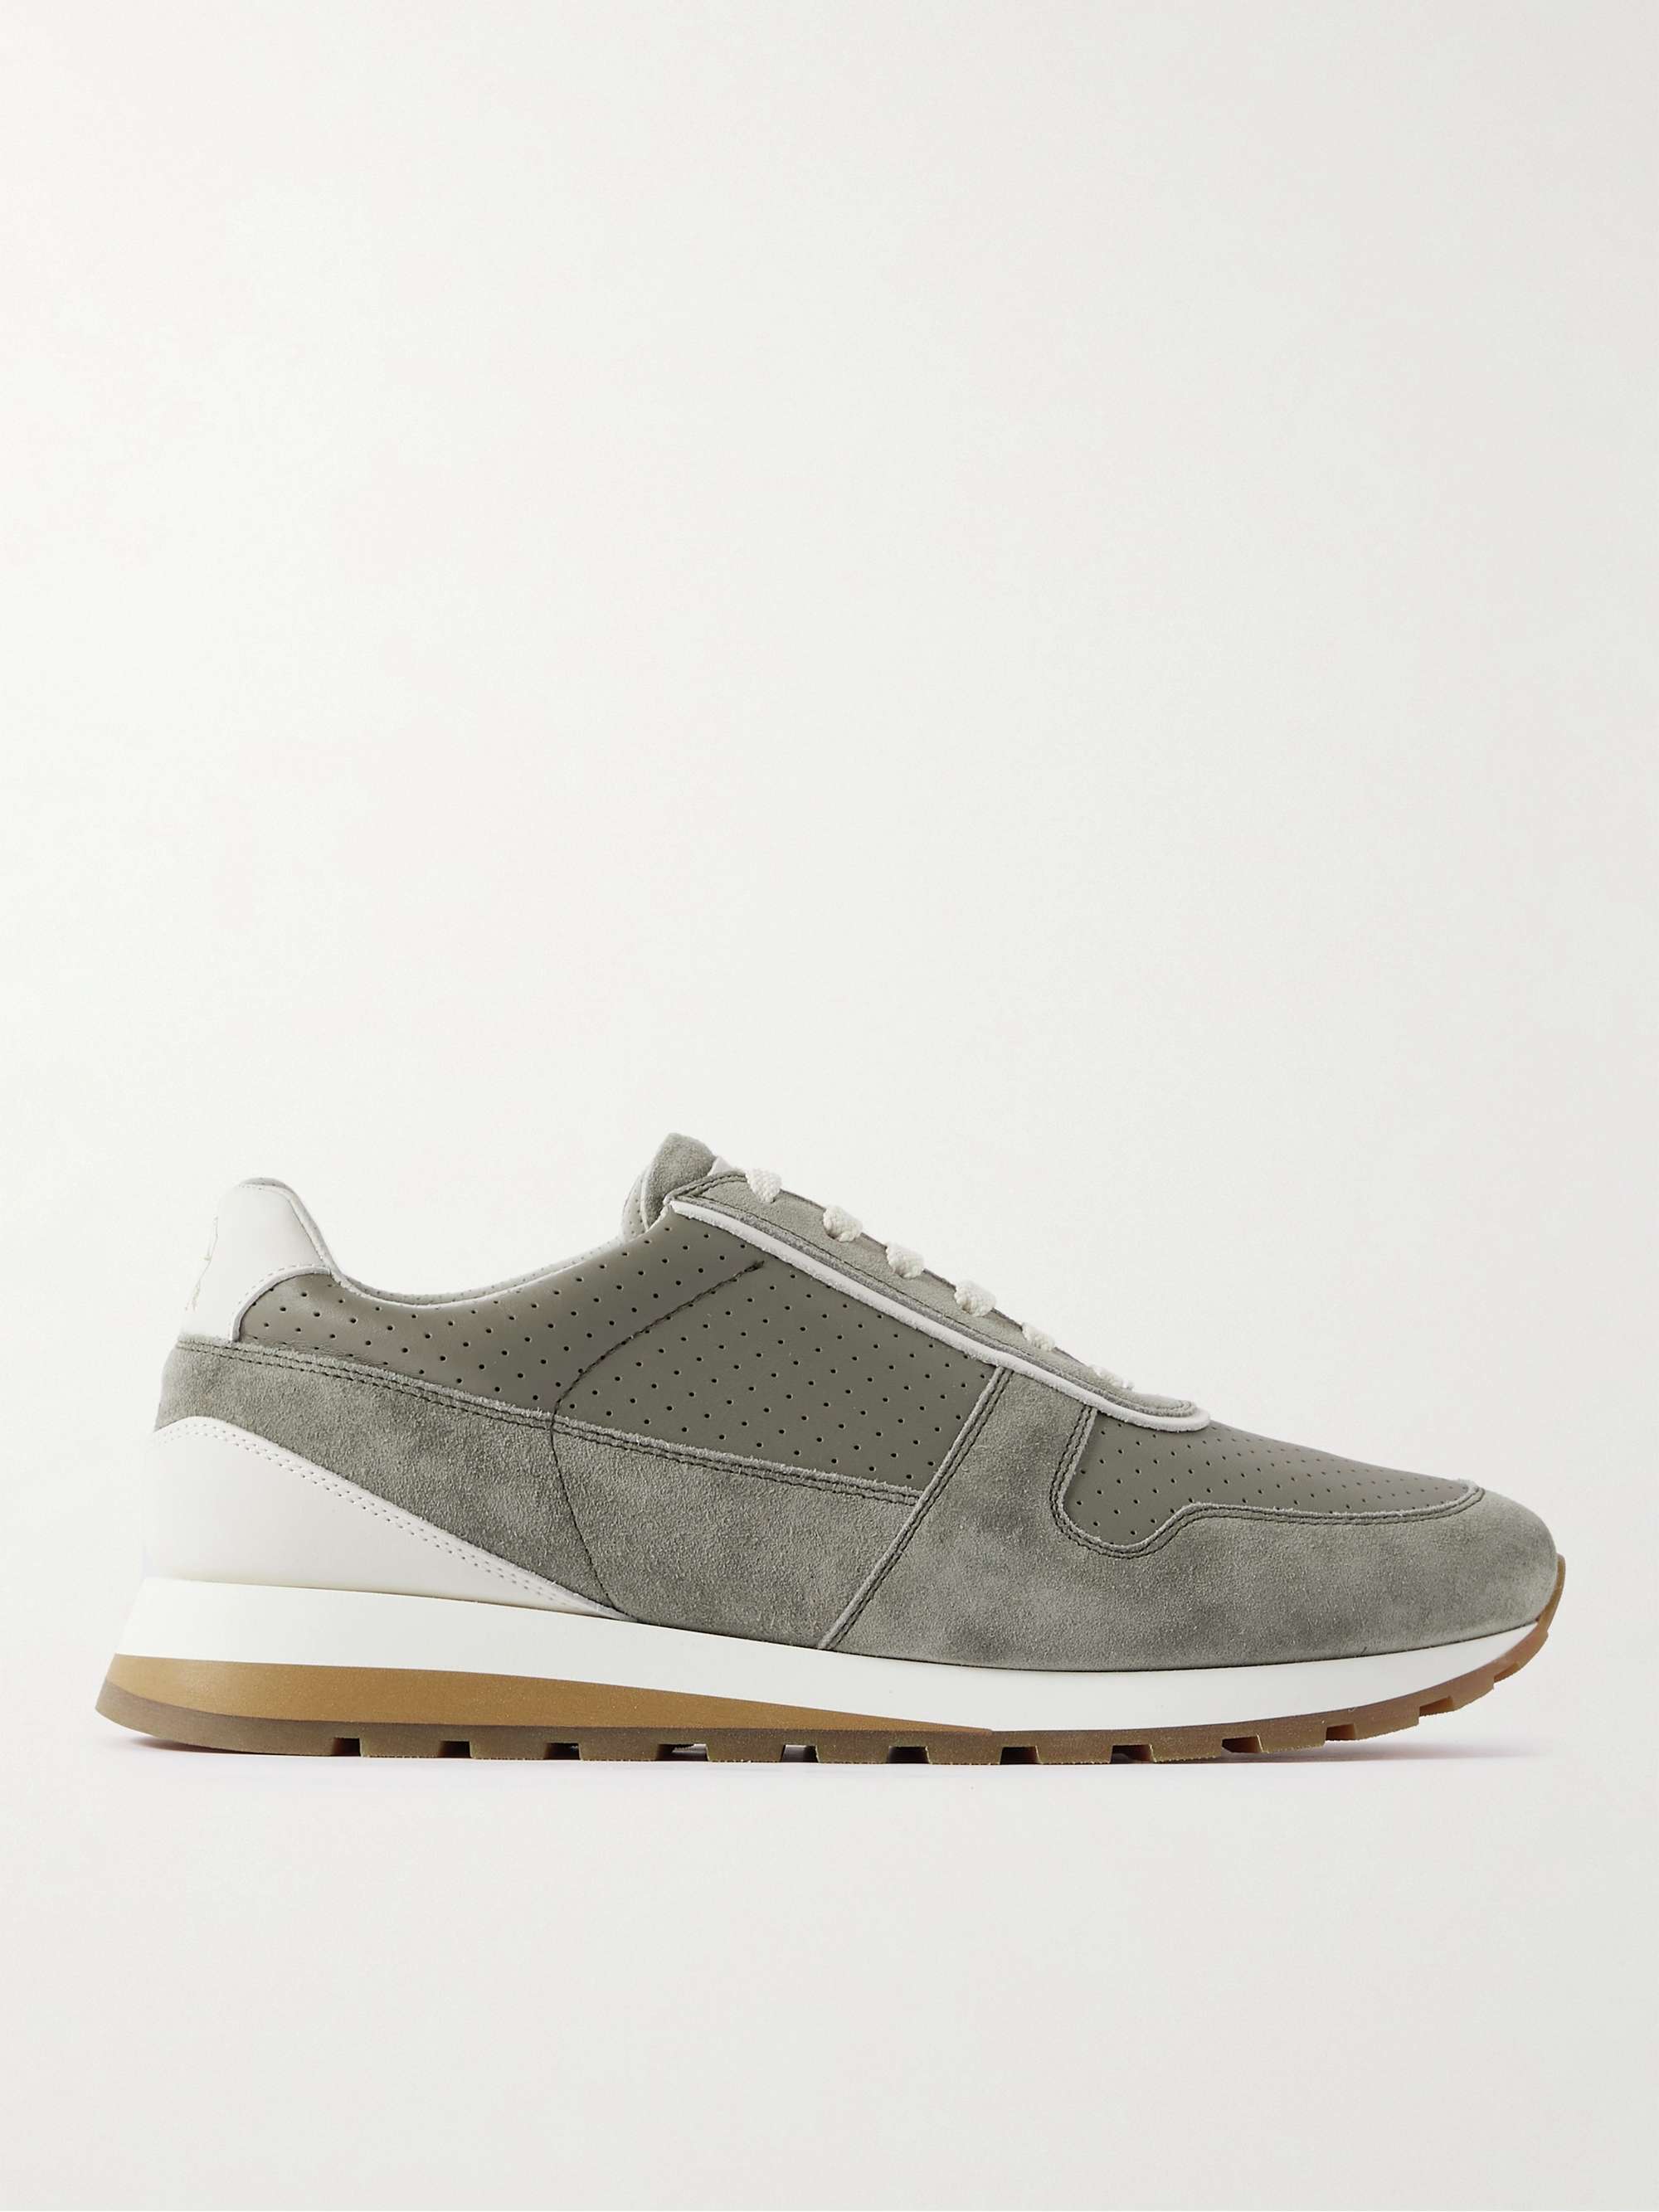 BRUNELLO CUCINELLI Perforated Leather and Suede Sneakers